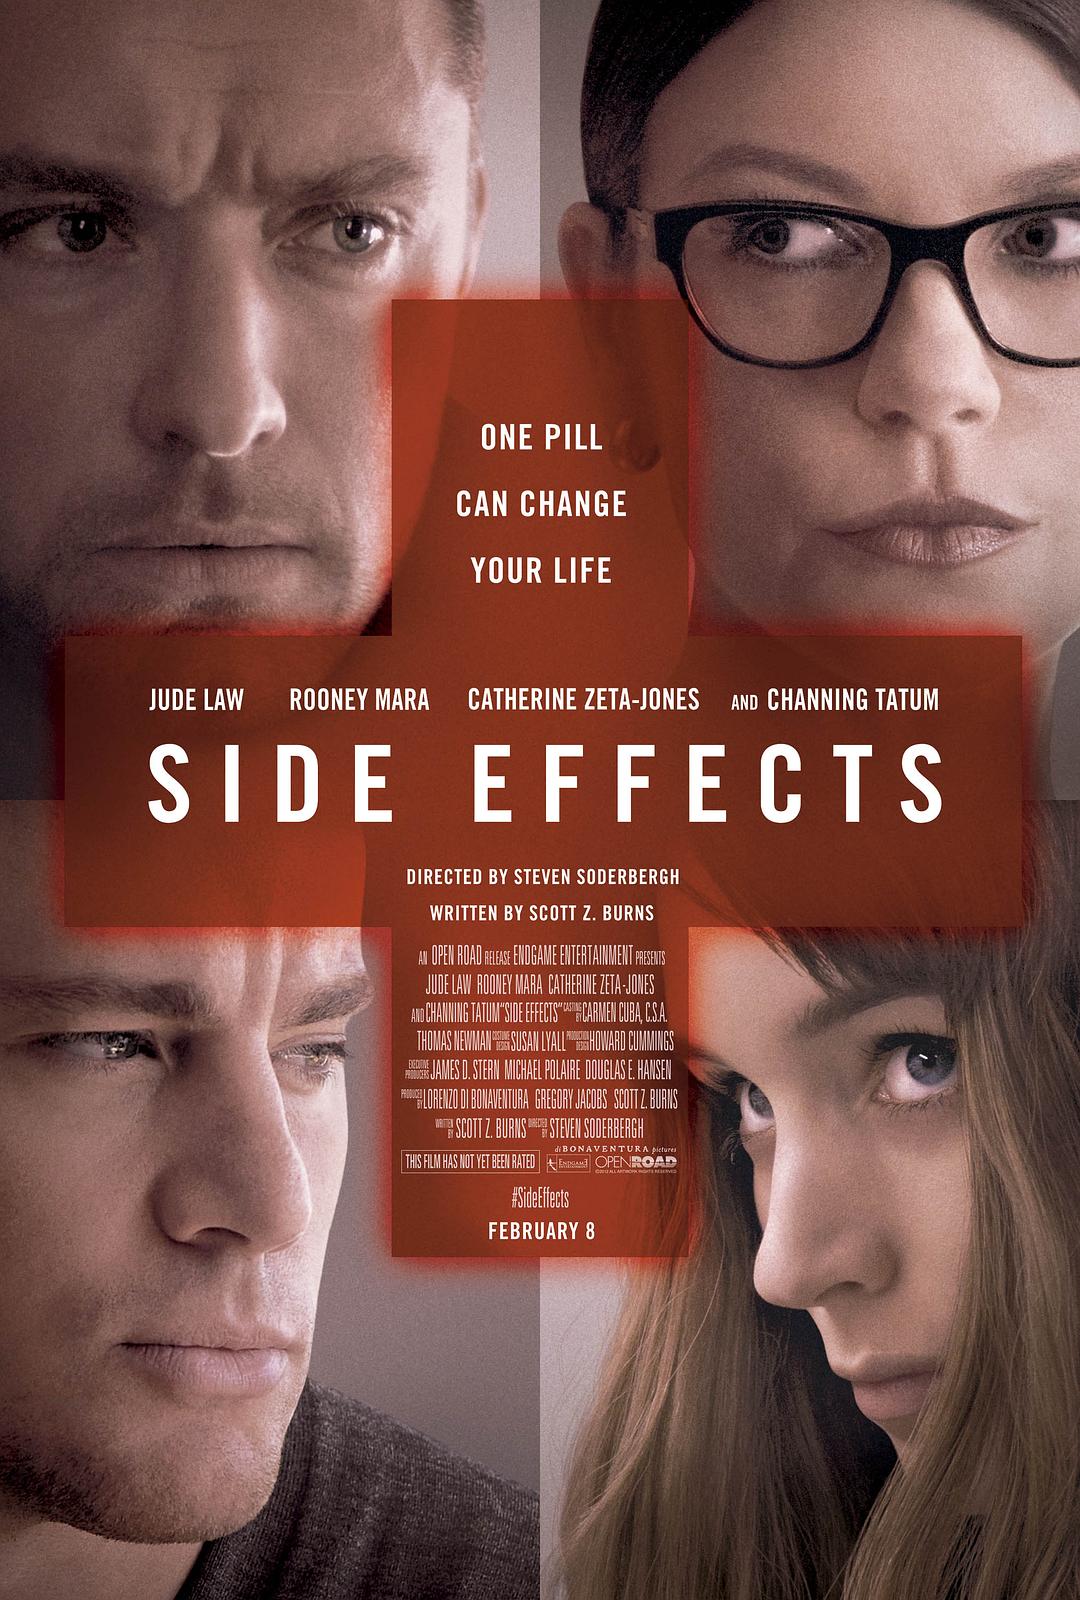  Side.Effects.2013.1080p.BluRay.x264-SPARKS 7.65GB-1.png